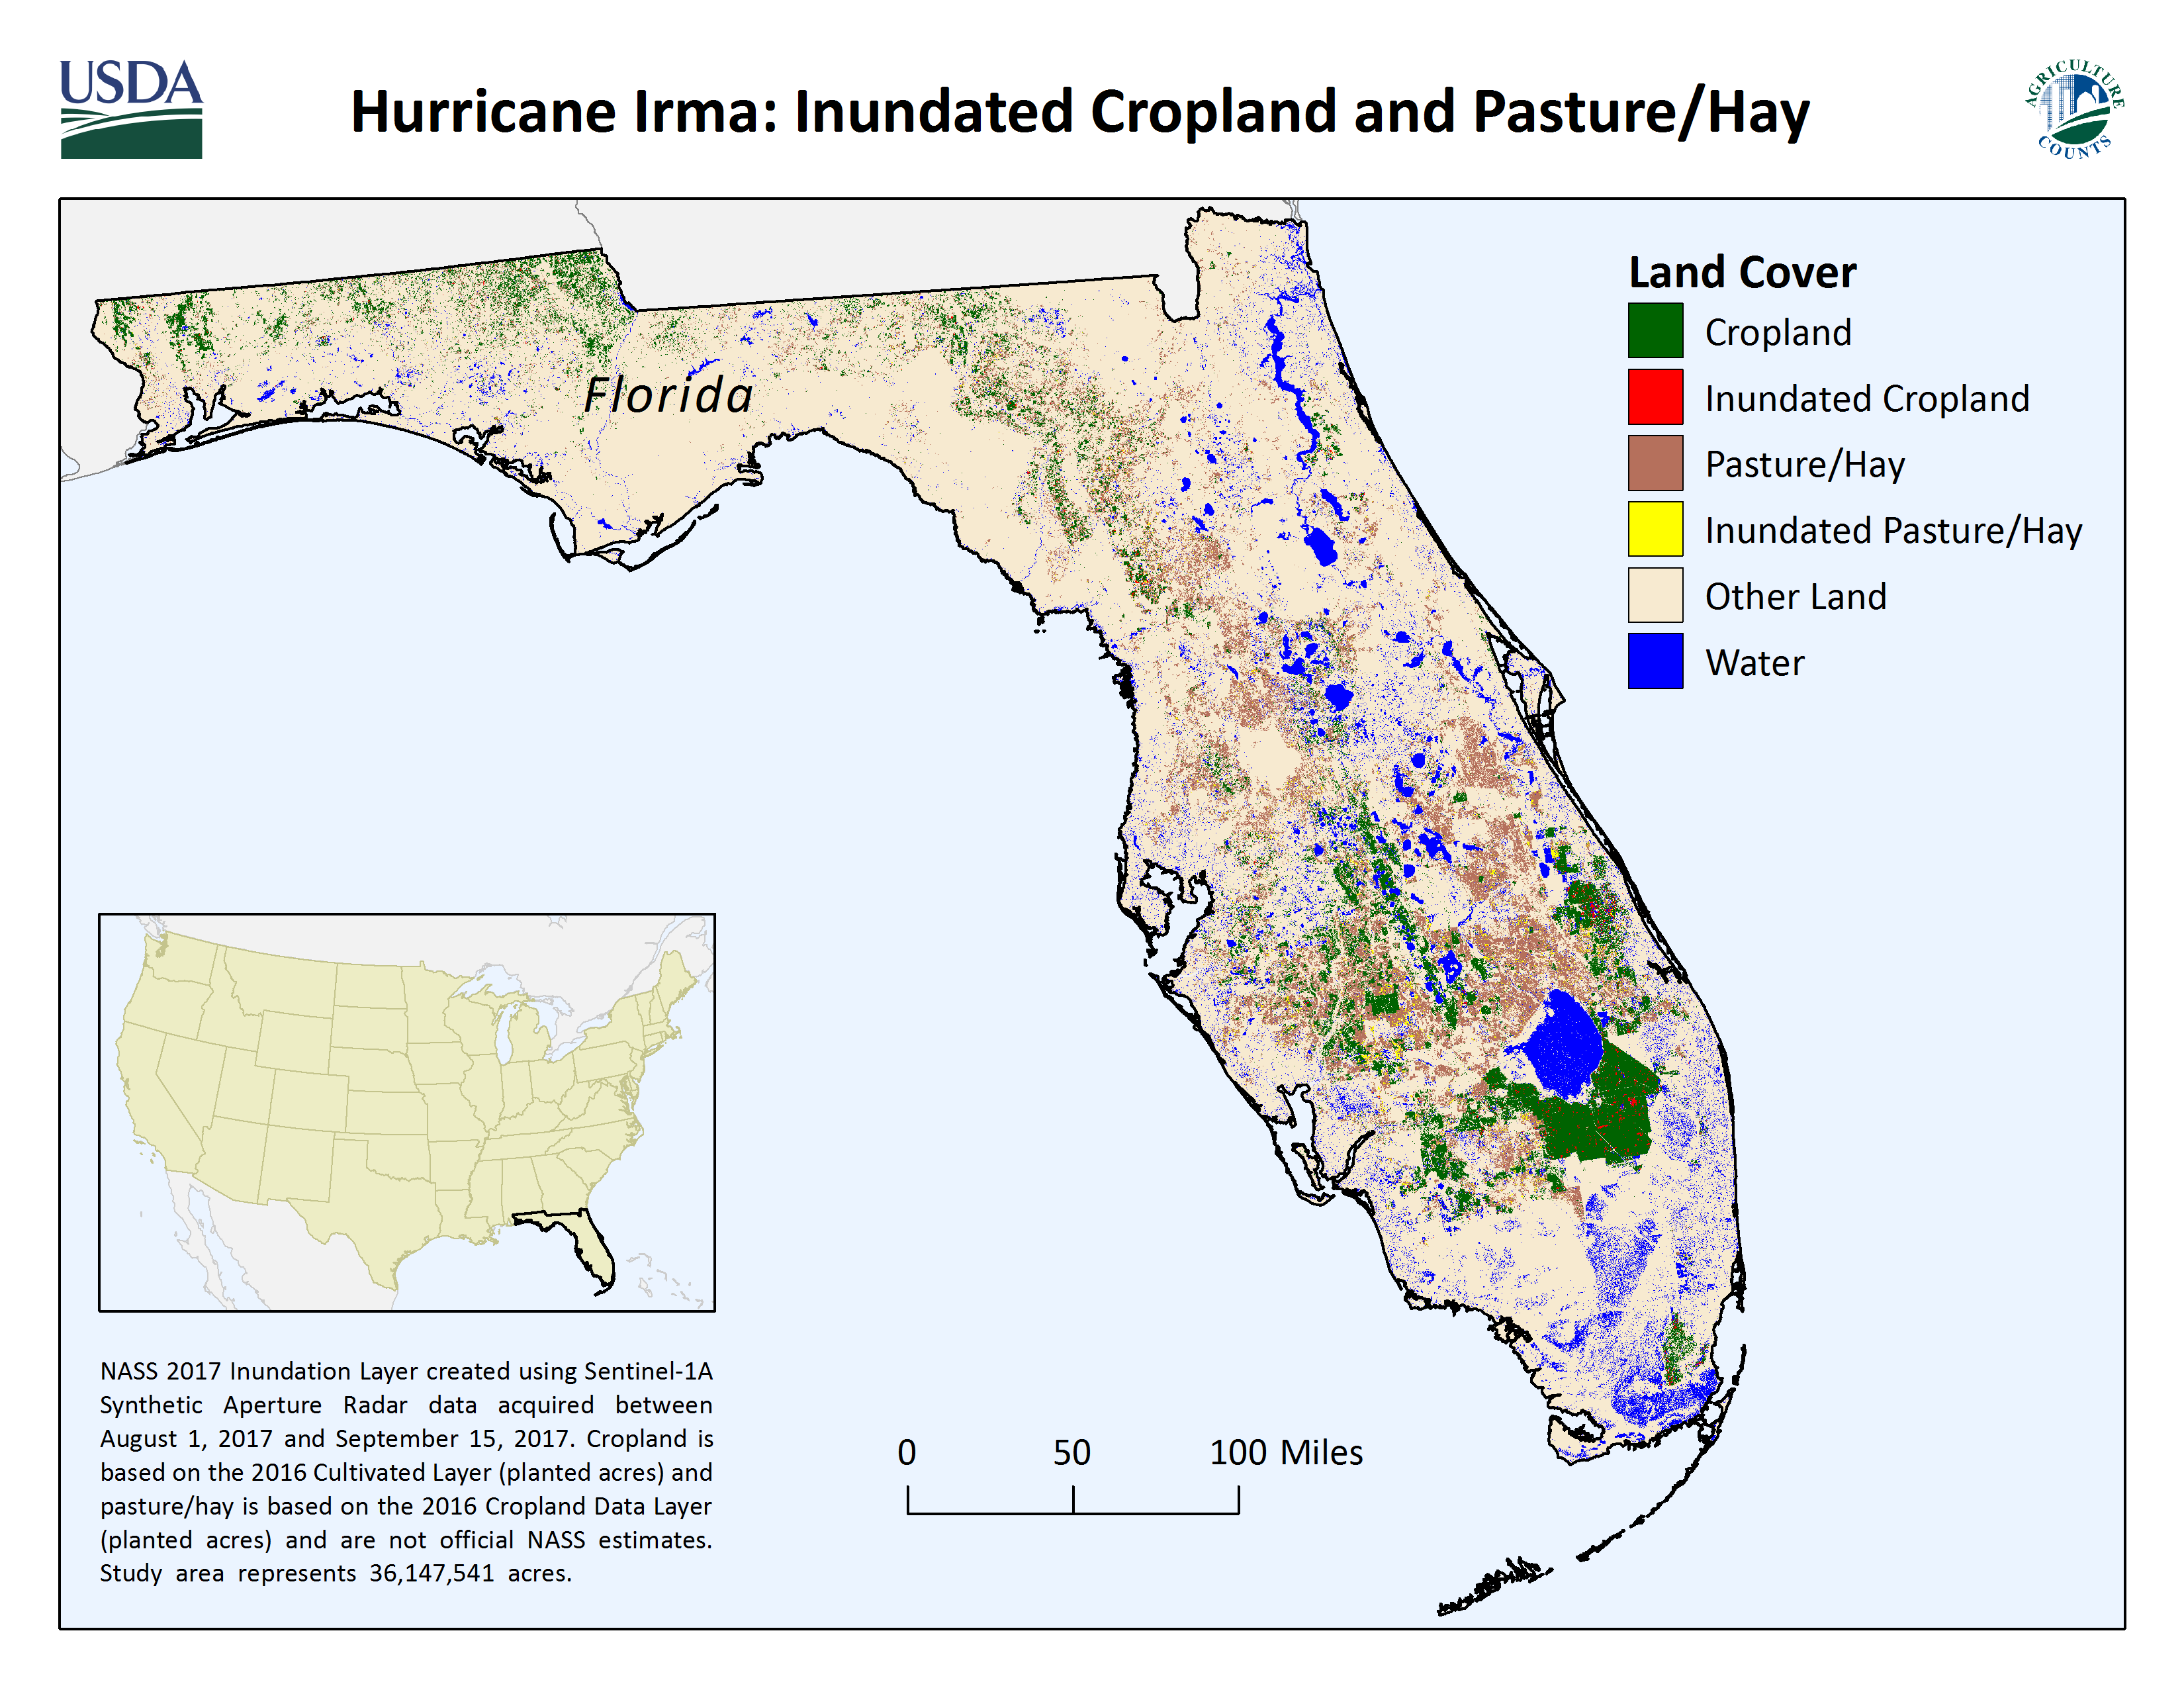 Map of Inundated Cropland and Pasture/Hay from Hurricane Irma